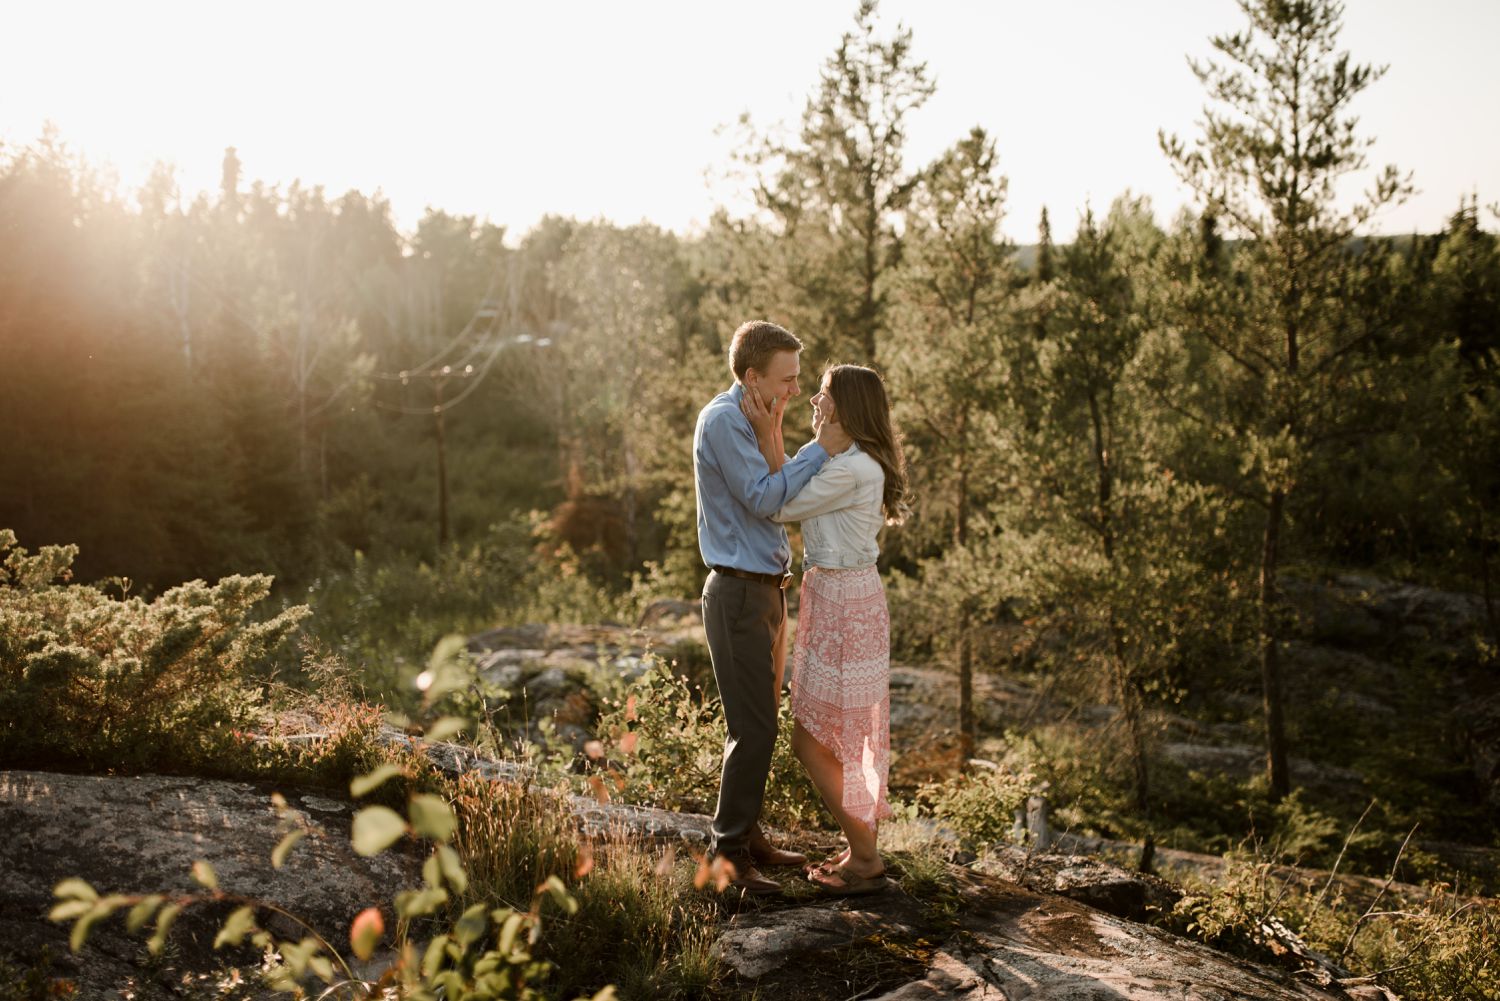 Manitoba engagement session locations, Whiteshell Manitoba, winnipeg engagement session location ideas at Falcon Trails Resort